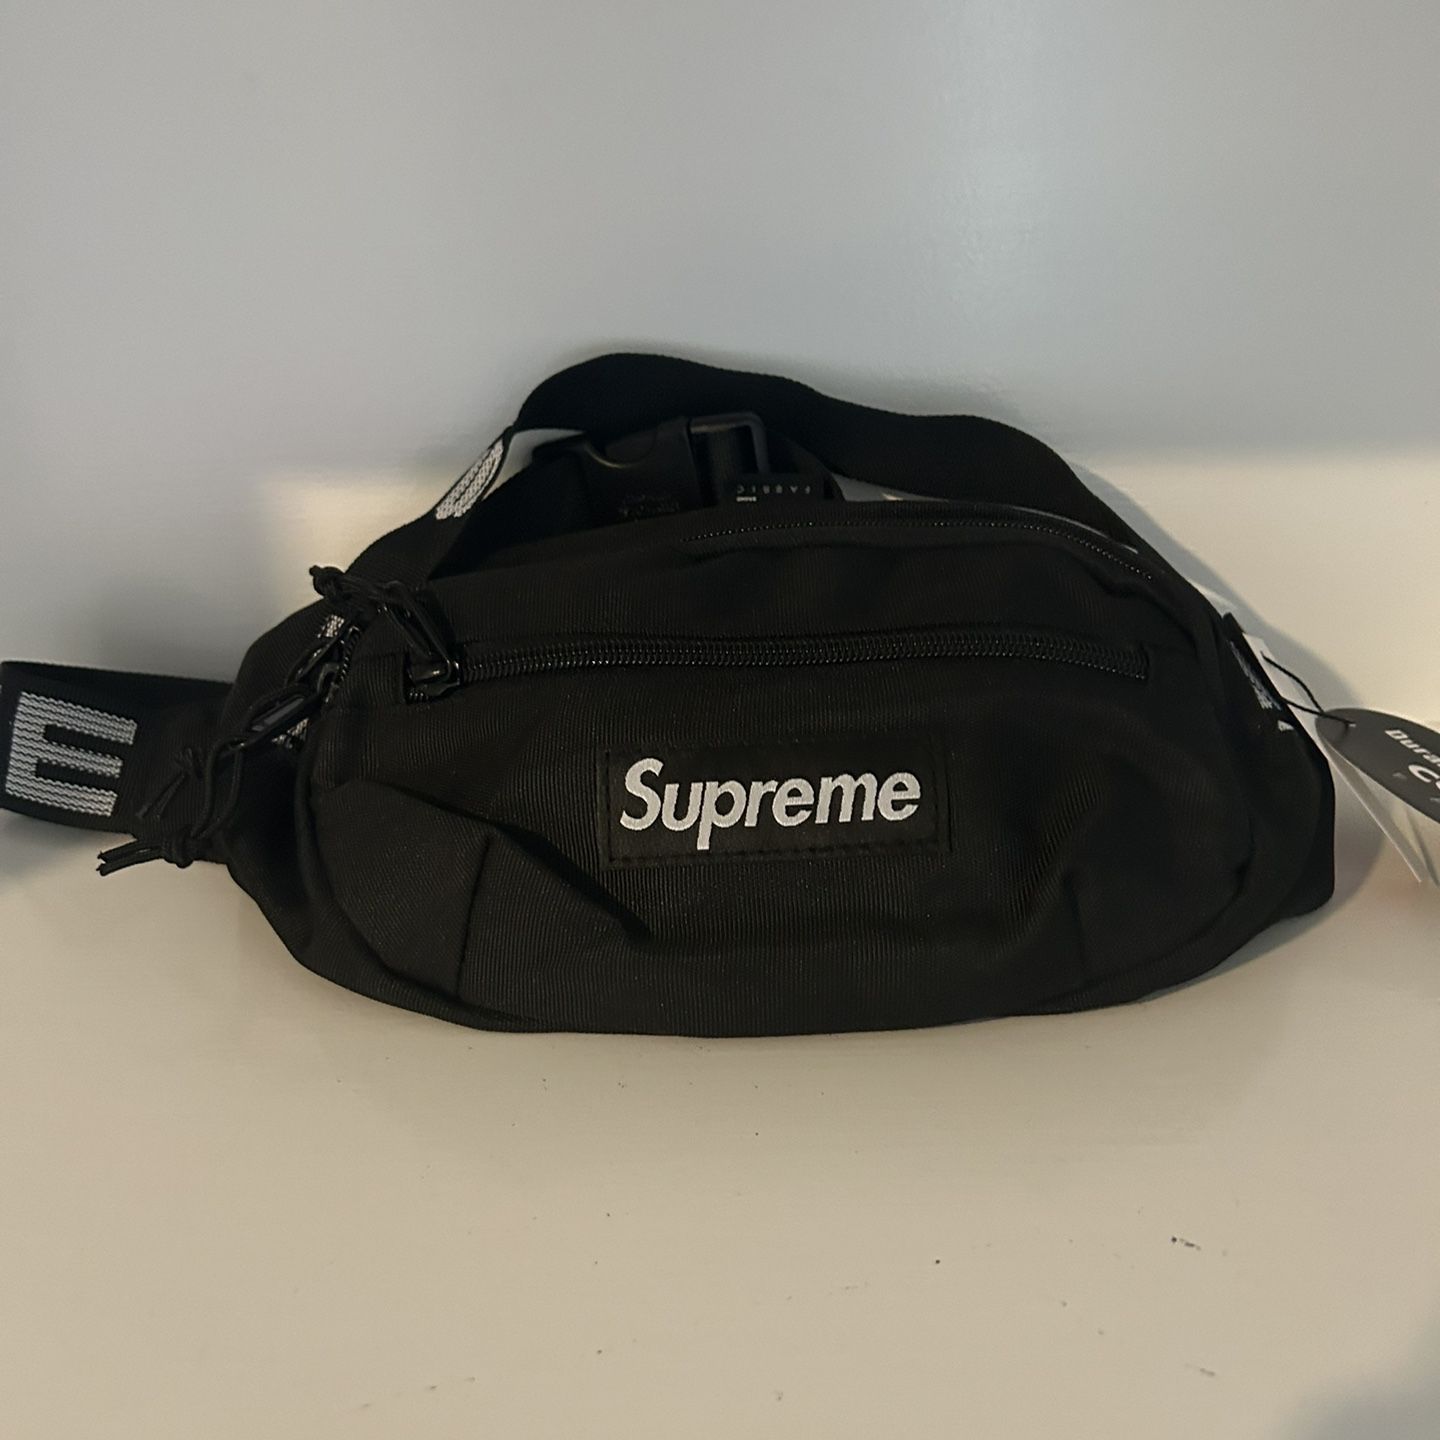 Supreme SS18 Waist Bag Black Brand New Ships Within 1 Day Receipt In 2nd Photo Willing To Negotiate 